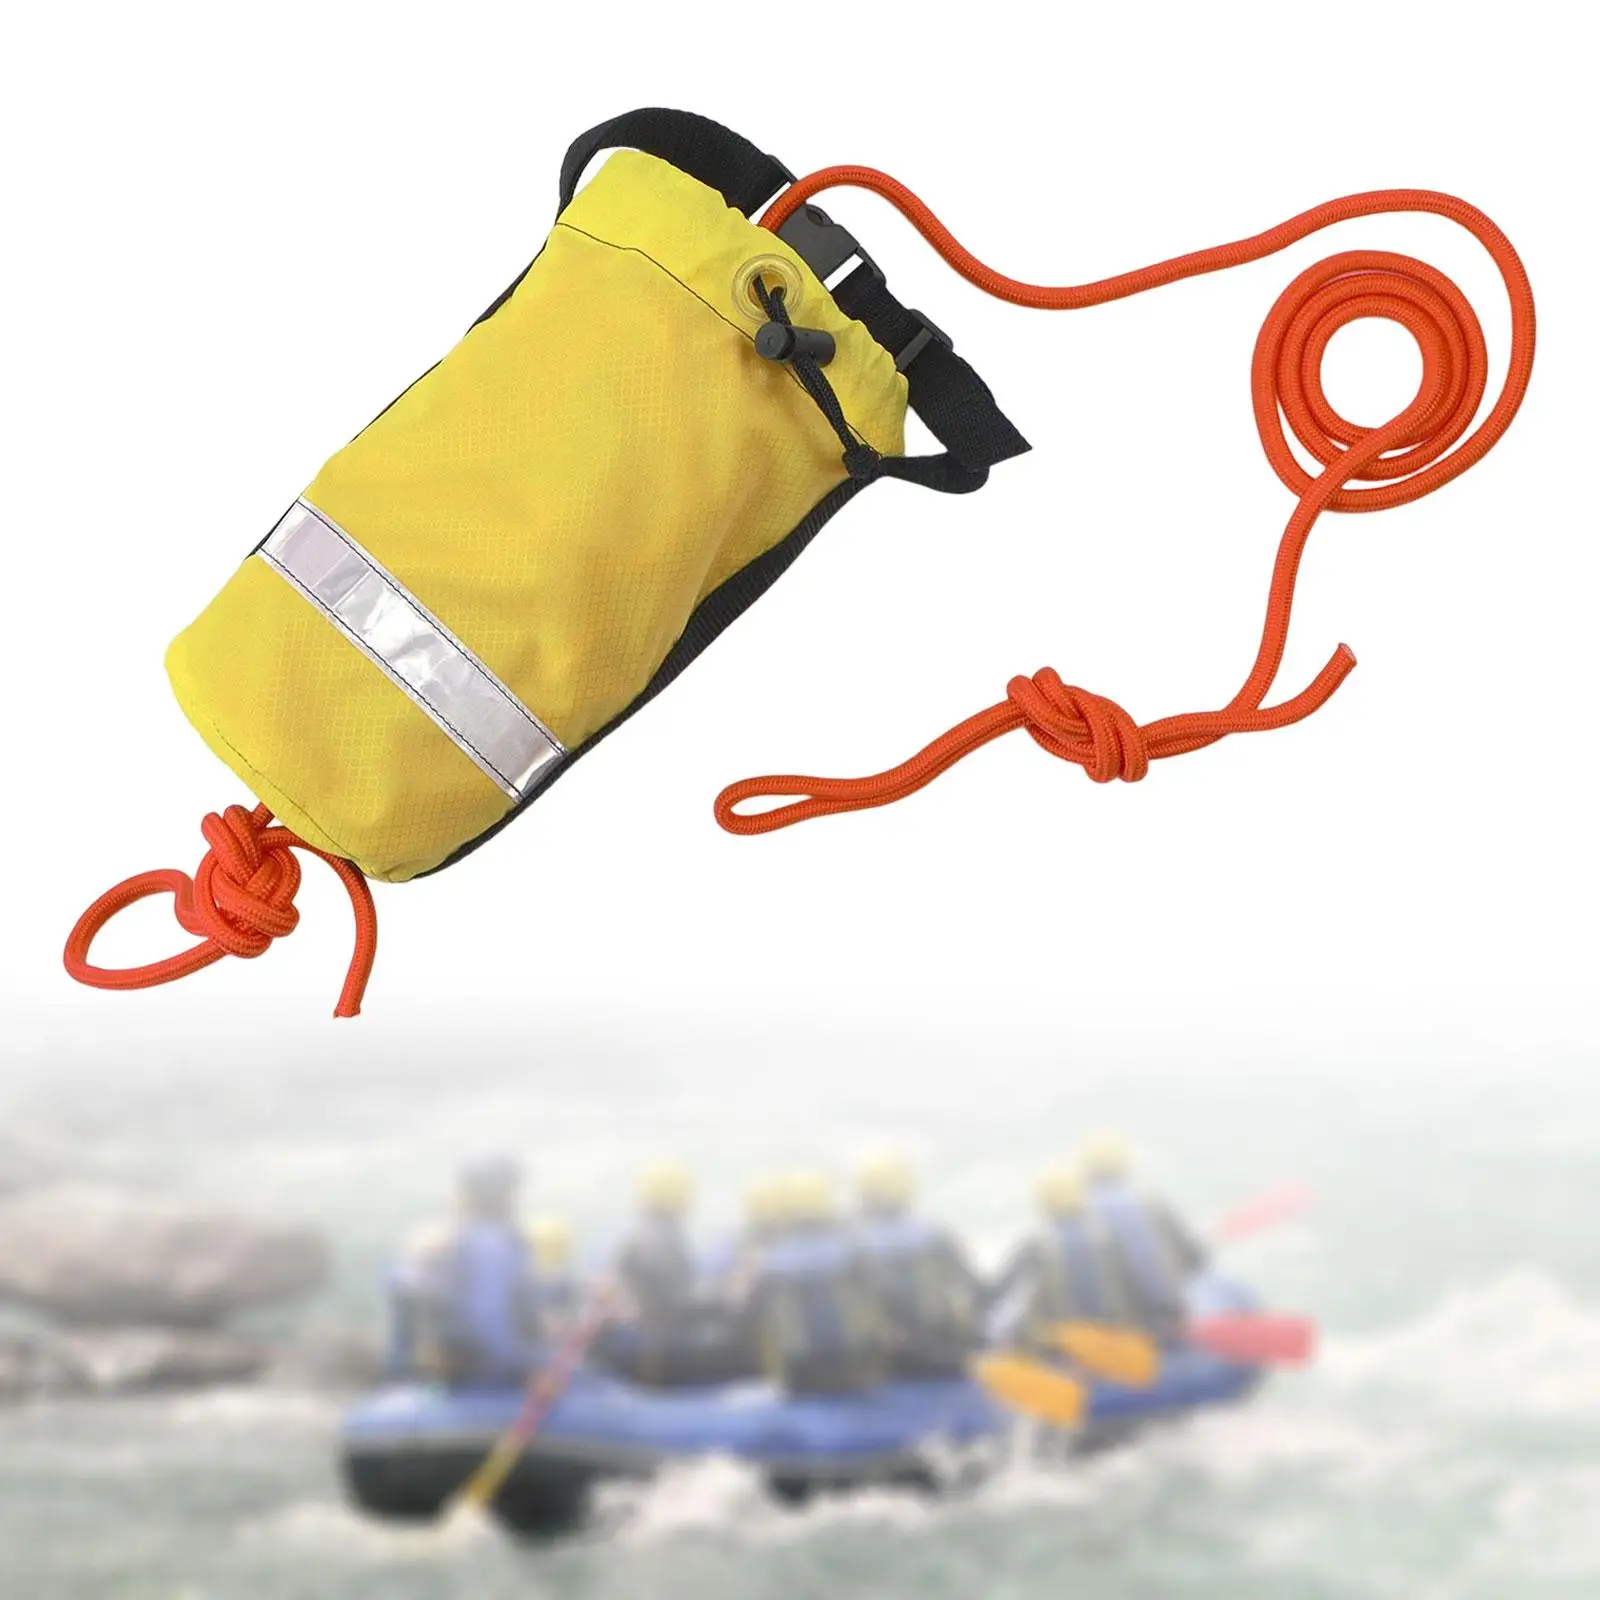 Rescue Throw Bag Flotation Device Floating Rope for Swimming Boating Safety Equipment